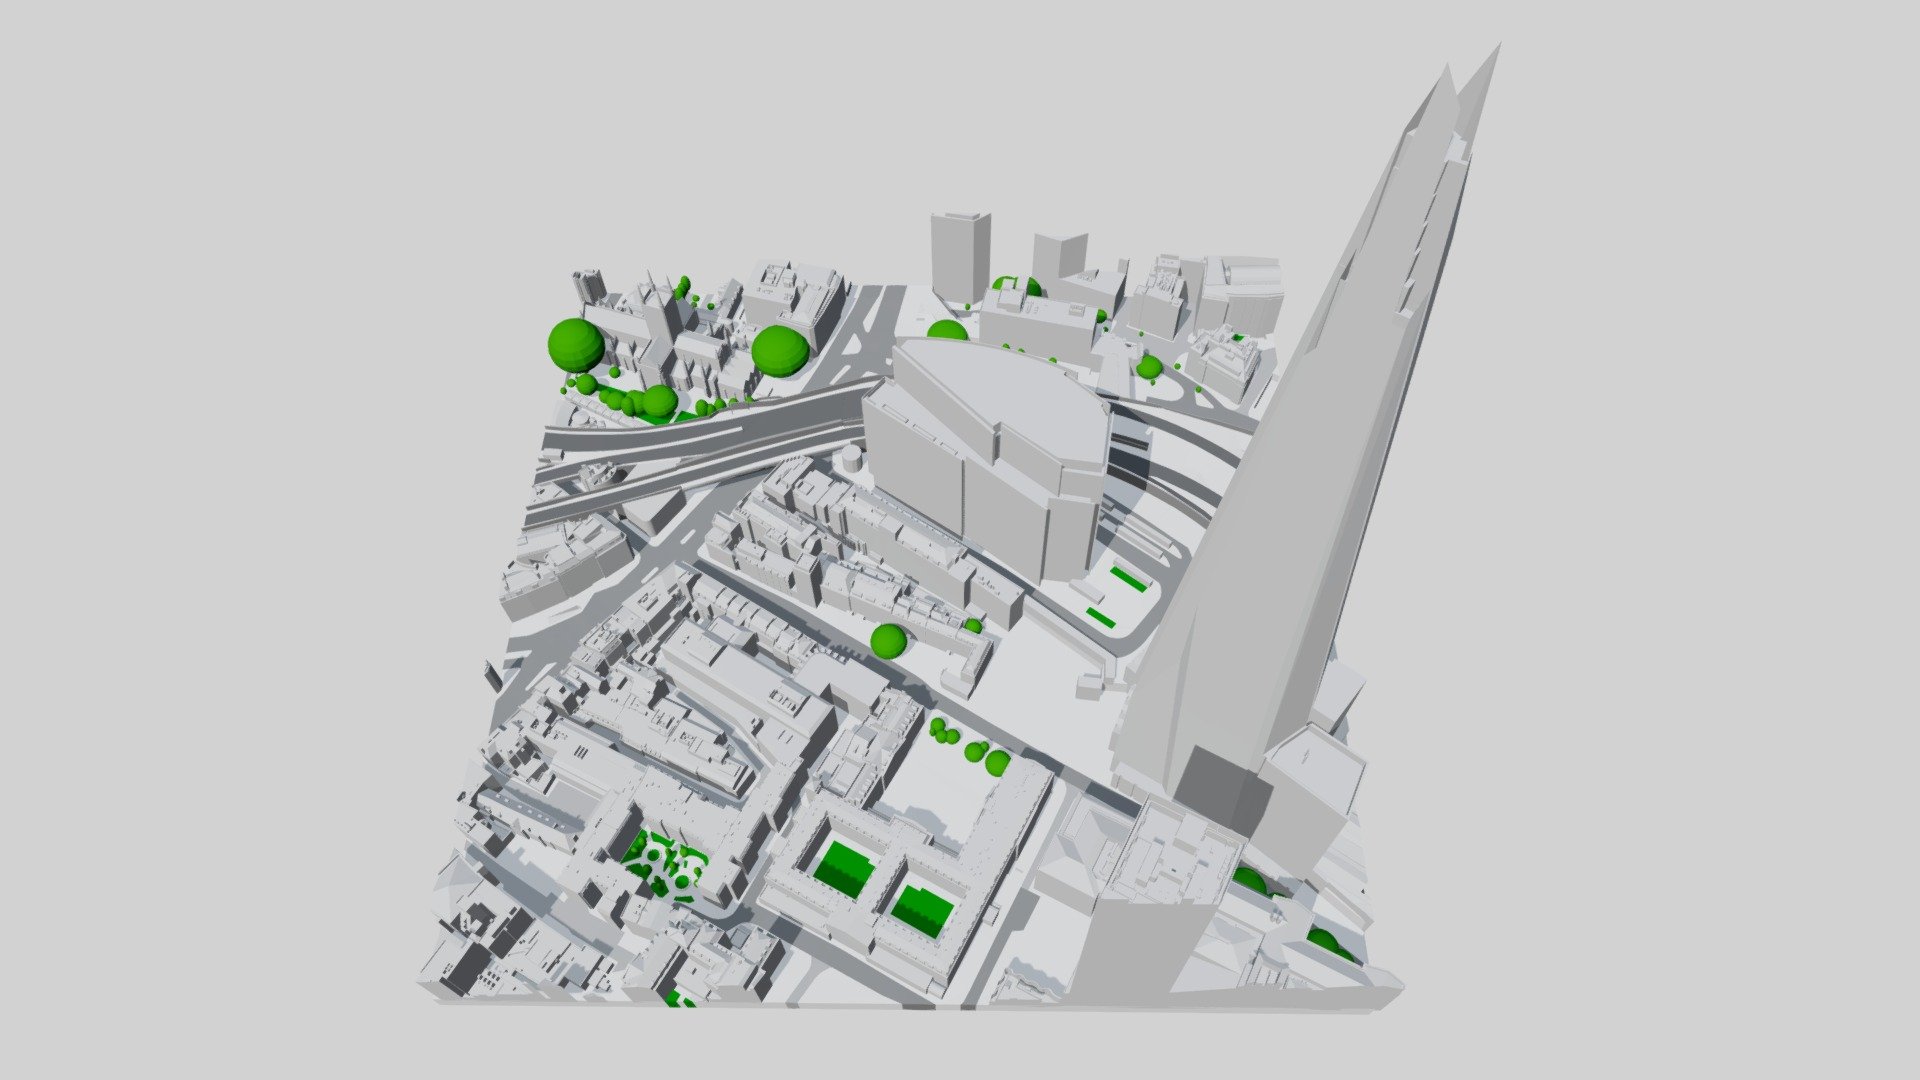 0.1 km2 3D Model of The Shard and London Bridge - 3D model by AccuCities (@3D-London) 3d model